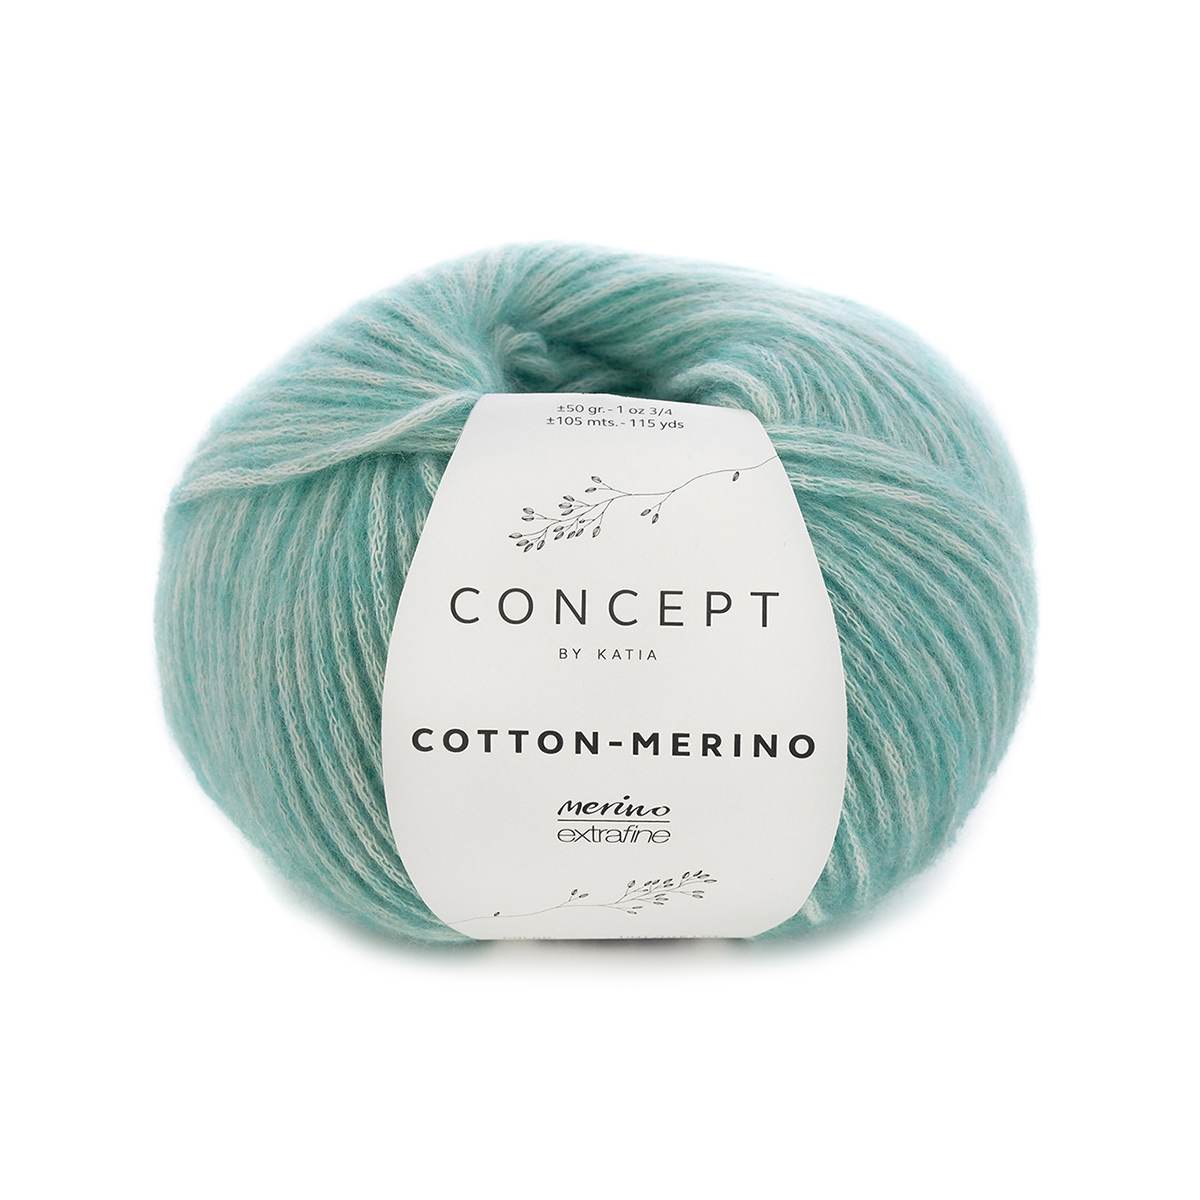 Warm, soft cotton yarn with very light weight merino wool. Merino Wool and Cotton yarn blend: Cotton-Merino is a fantastic yarn for crochet patterns or knit patterns.  Magnificent natural fiber blend for making soft textural sweaters and other patterns. 